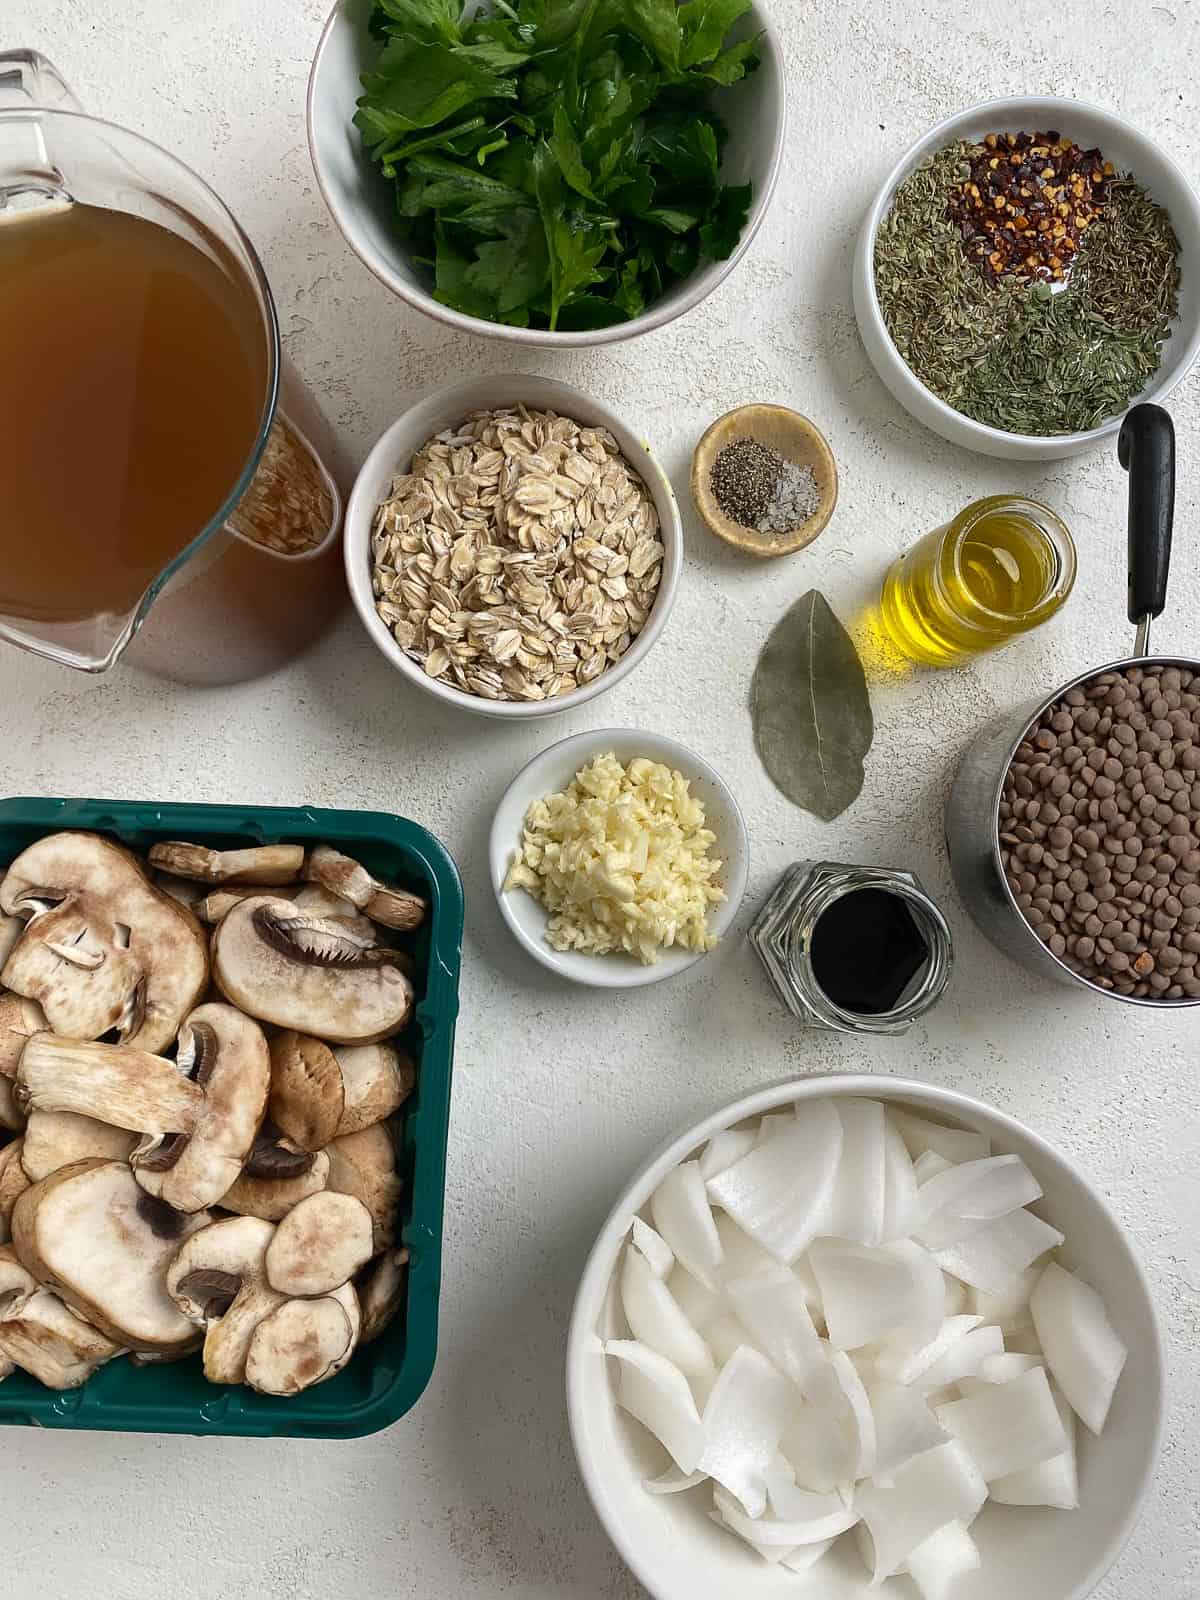 ingredients for Vegan Lentil Meatballs measured out against a white surface